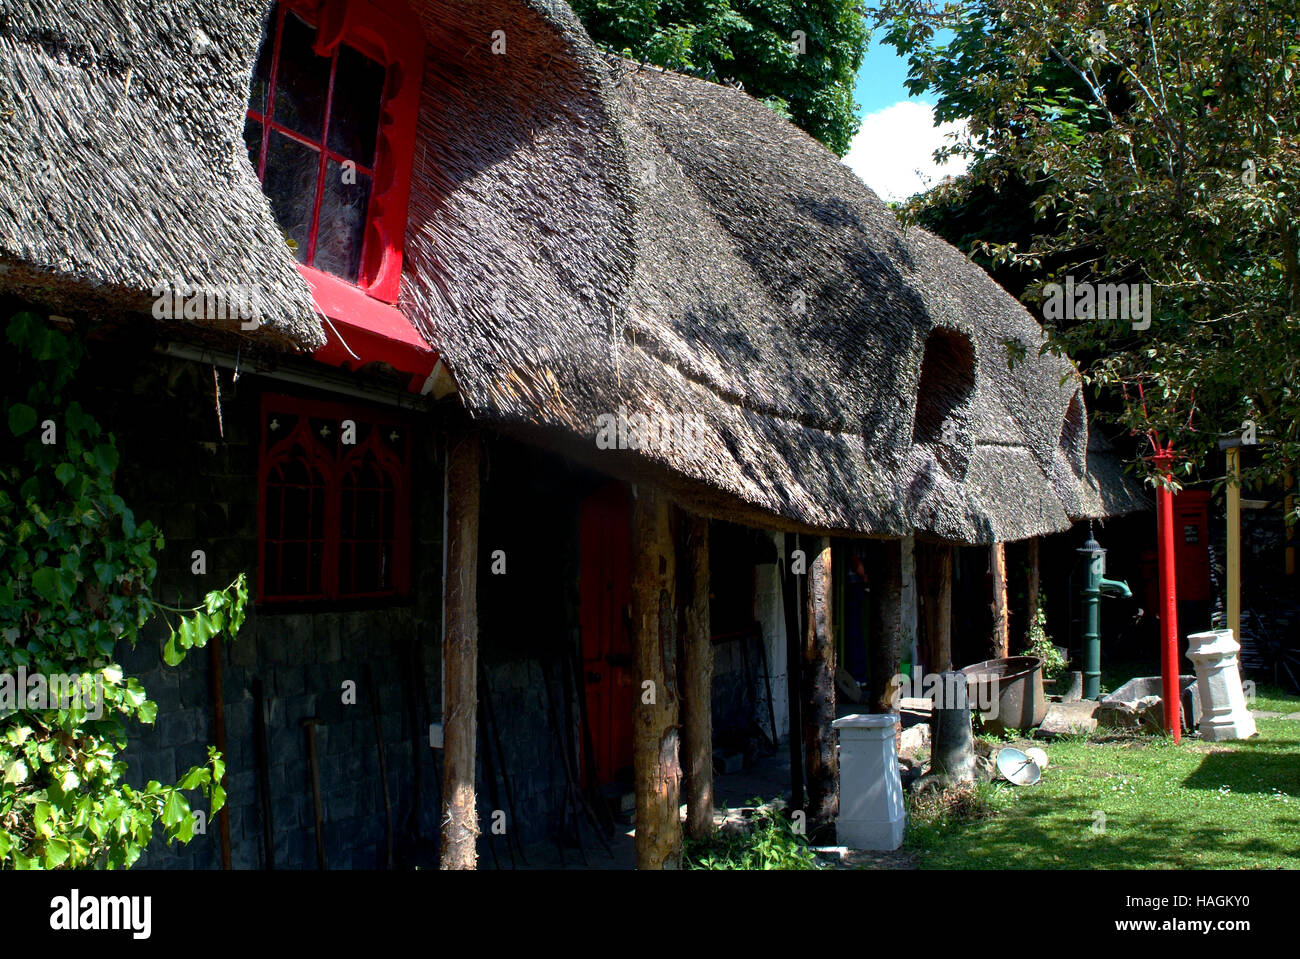 Thatch Cottage, Irish Thatched Cottage, Thatched Forge, Ireland's Ancient East, Cashel Folk Museum Stock Photo